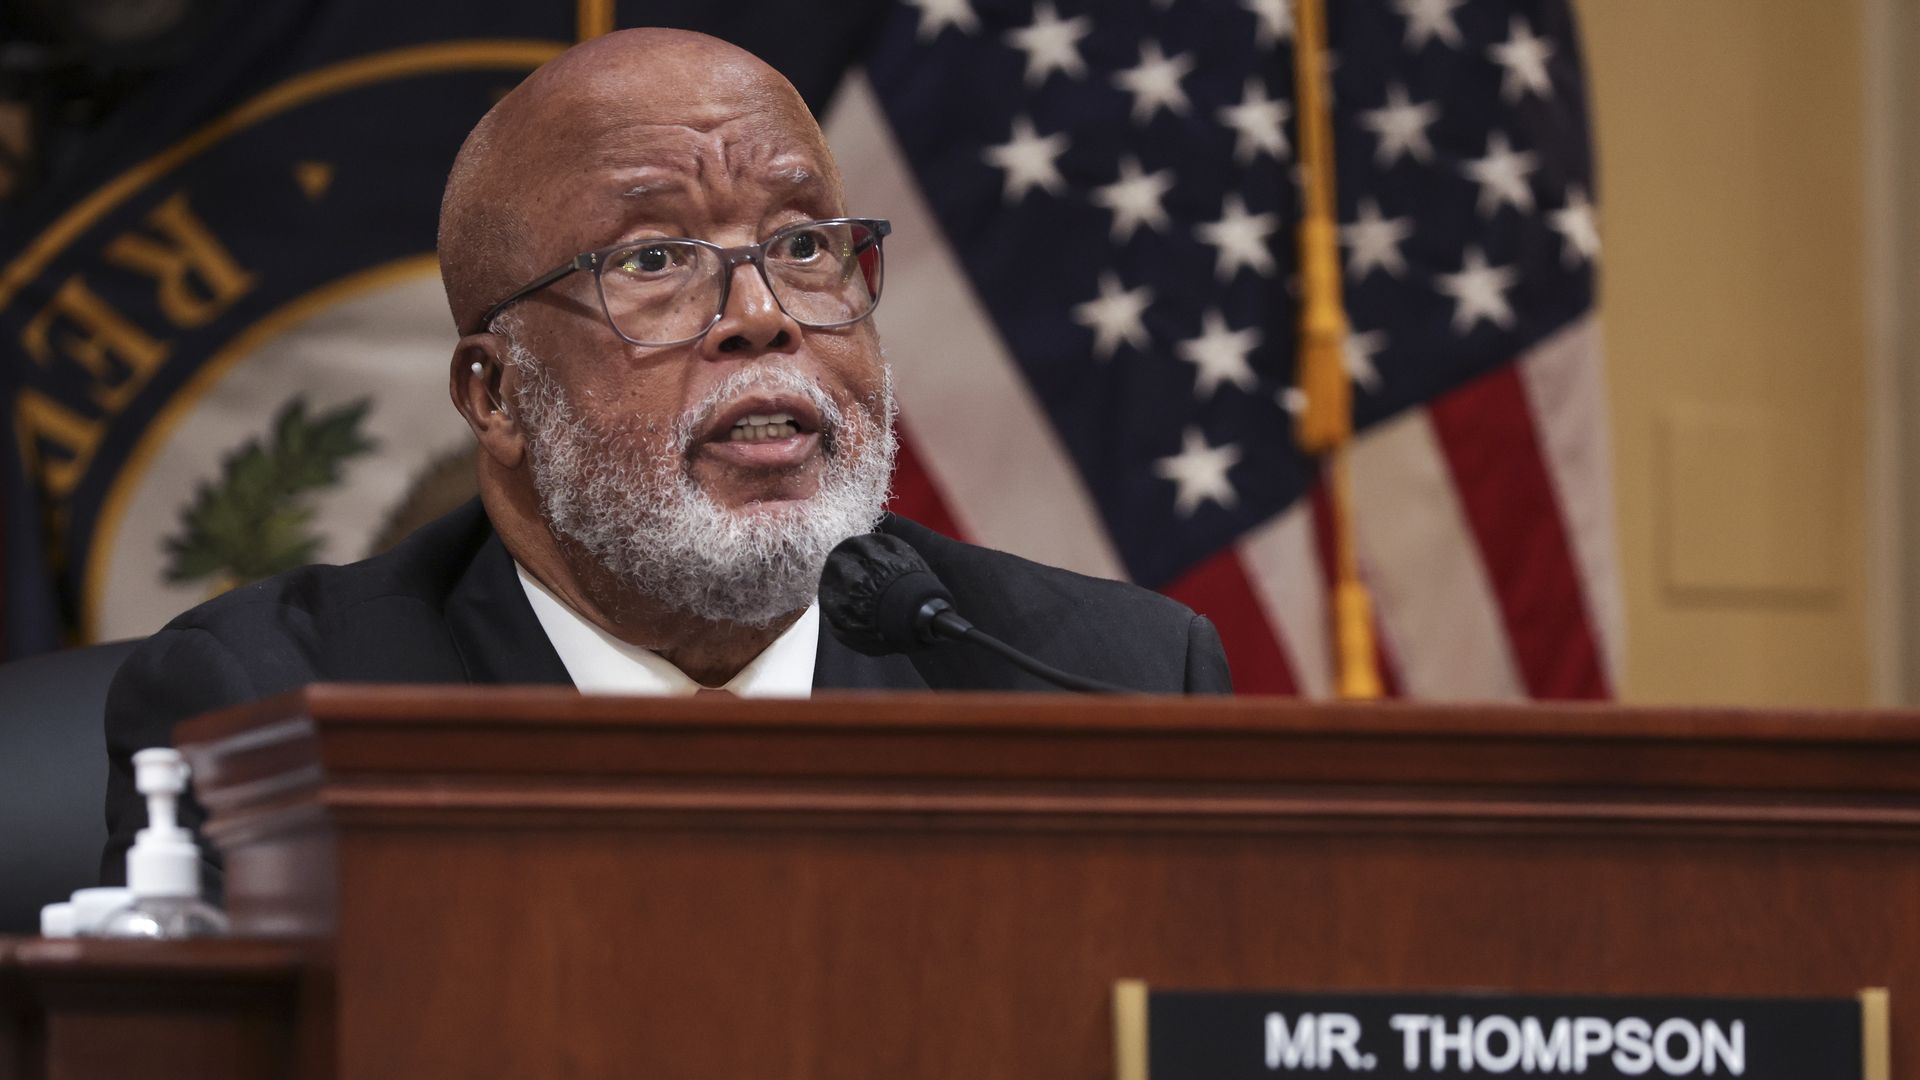  Rep. Bennie Thompson delivers remarks during a hearing on the January 6th investigation in the Cannon House Office Building on October 13, 2022 in Washington, DC.